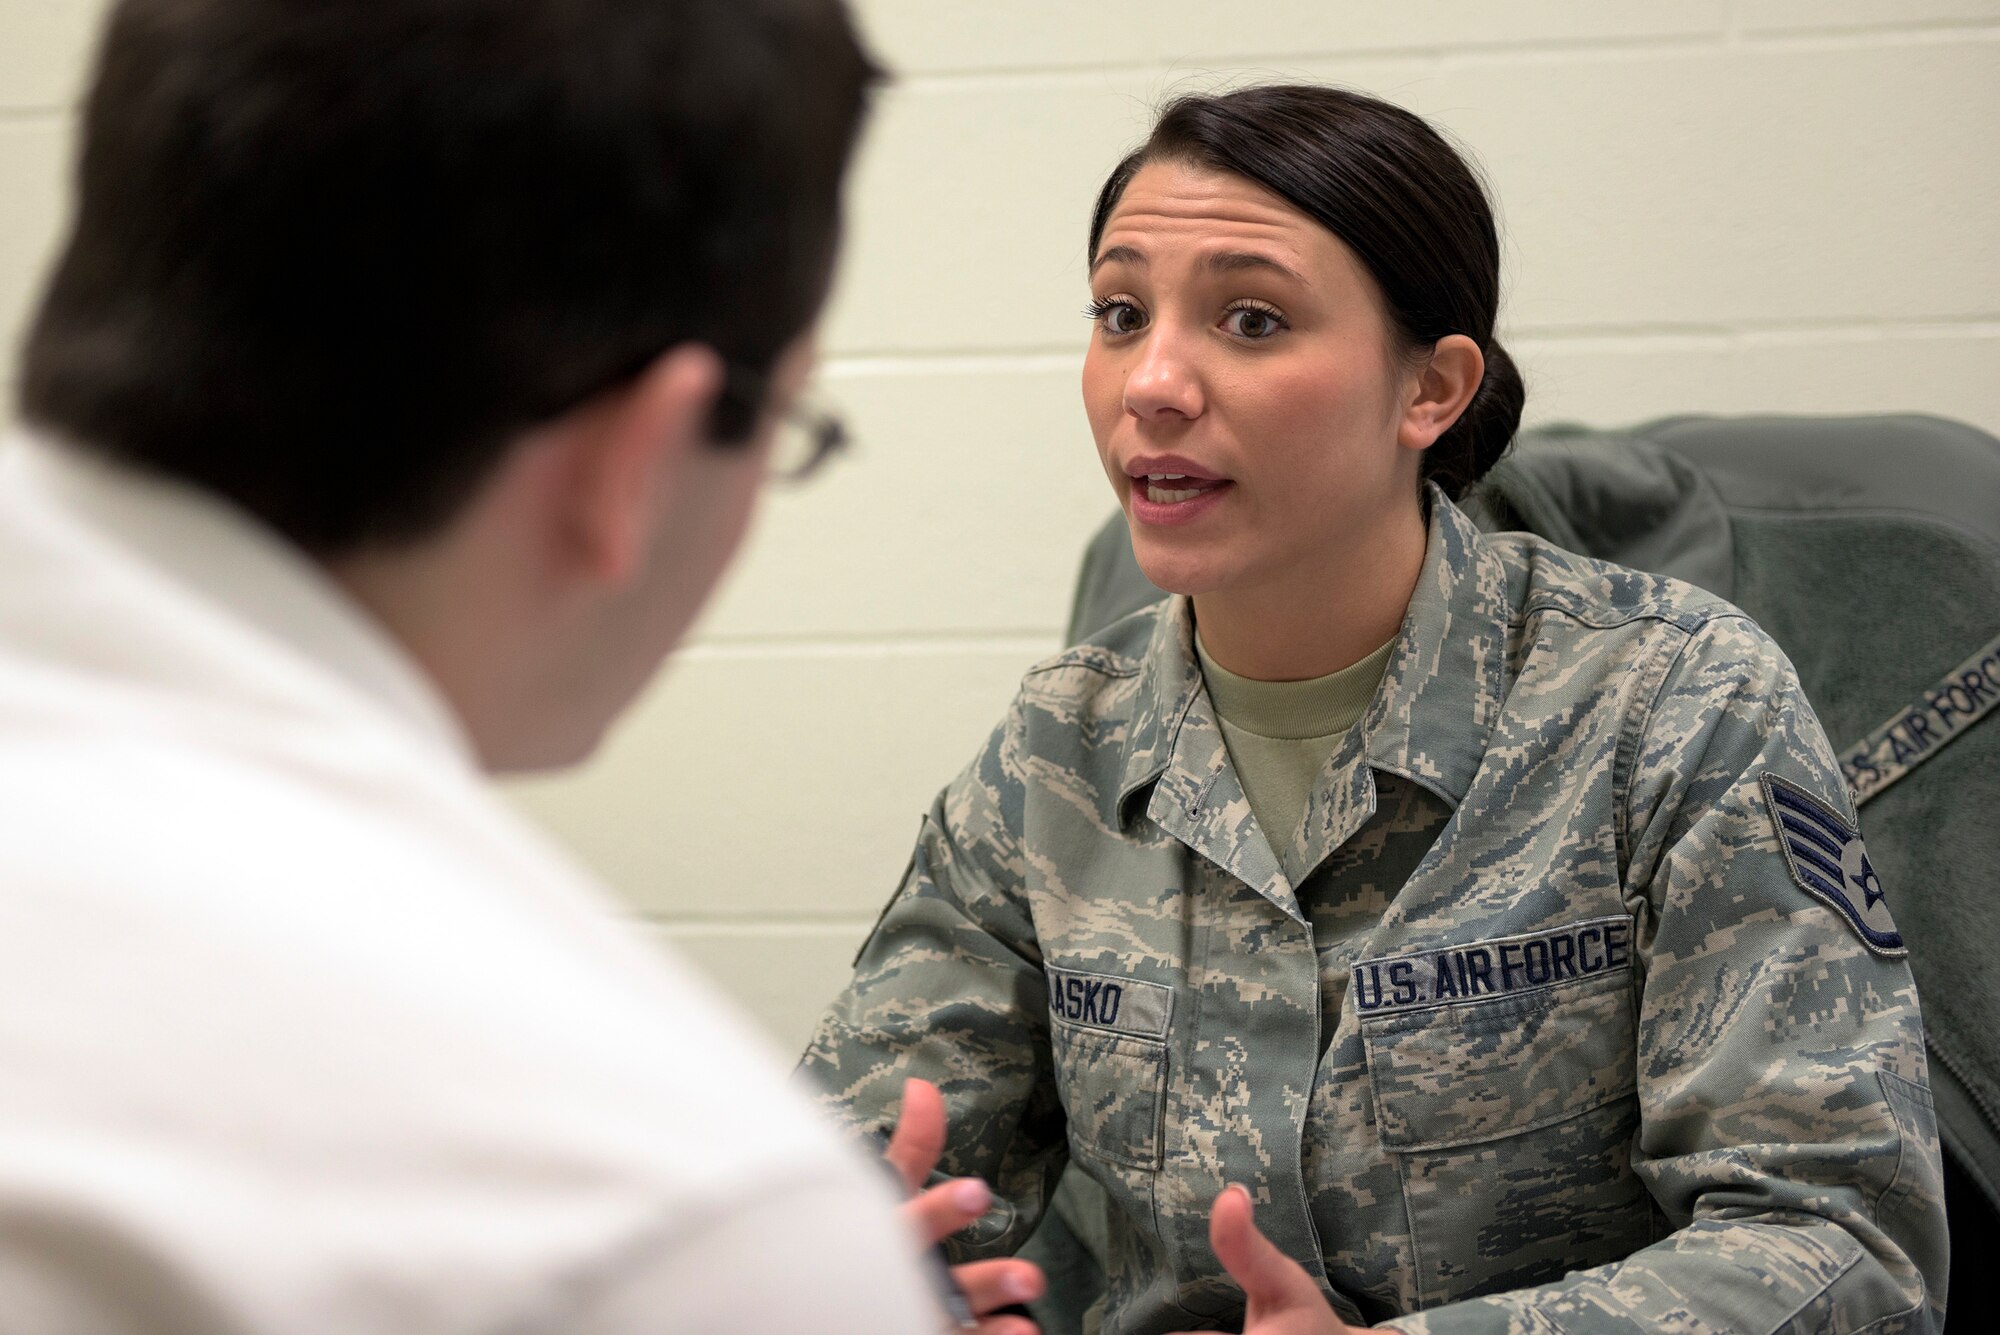 U.S. Air Force Staff Sgt. Rachael L. Blasko, an enlisted accessions recruiter with the 182nd Force Support Squadron, Illinois Air National Guard, explains the enlistment process to a new recruit in Peoria, Ill., May 17, 2016. Blasko is the unit’s newest recruiter and has been serving in that role for two years. (U.S. Air National Guard photo by Staff Sgt. Lealan Buehrer)